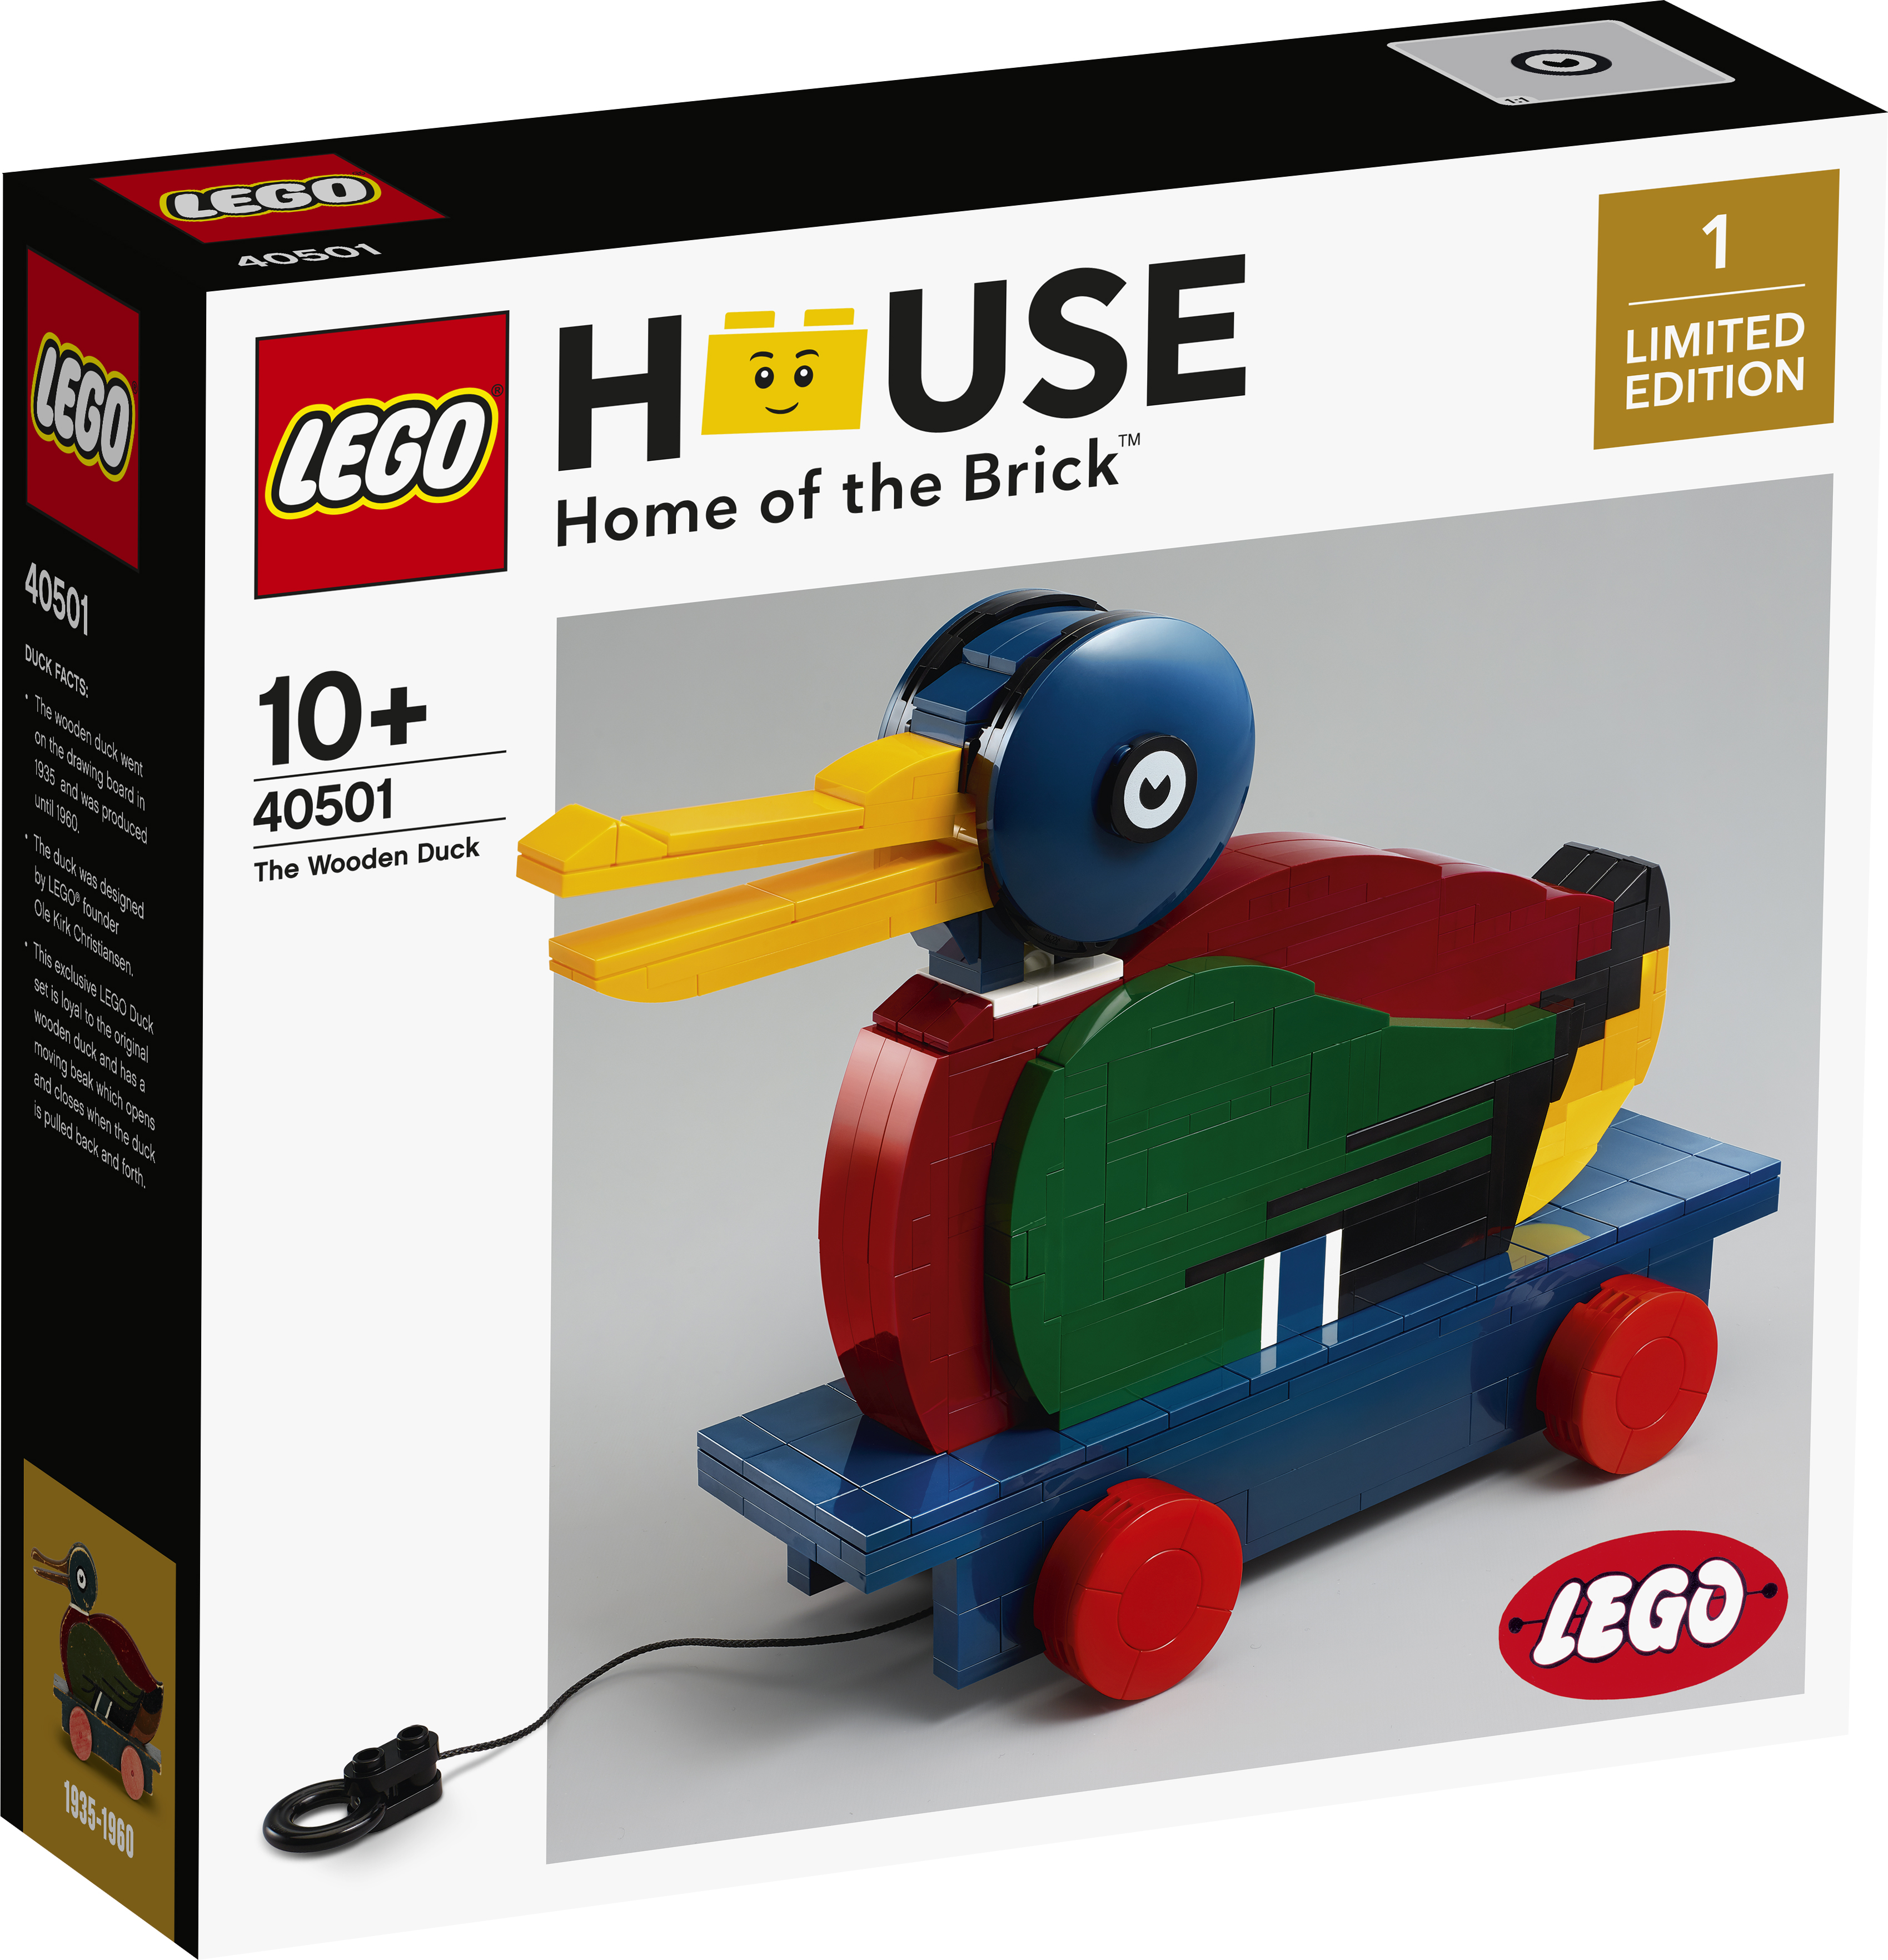 LEGO® - Exclusive product launch